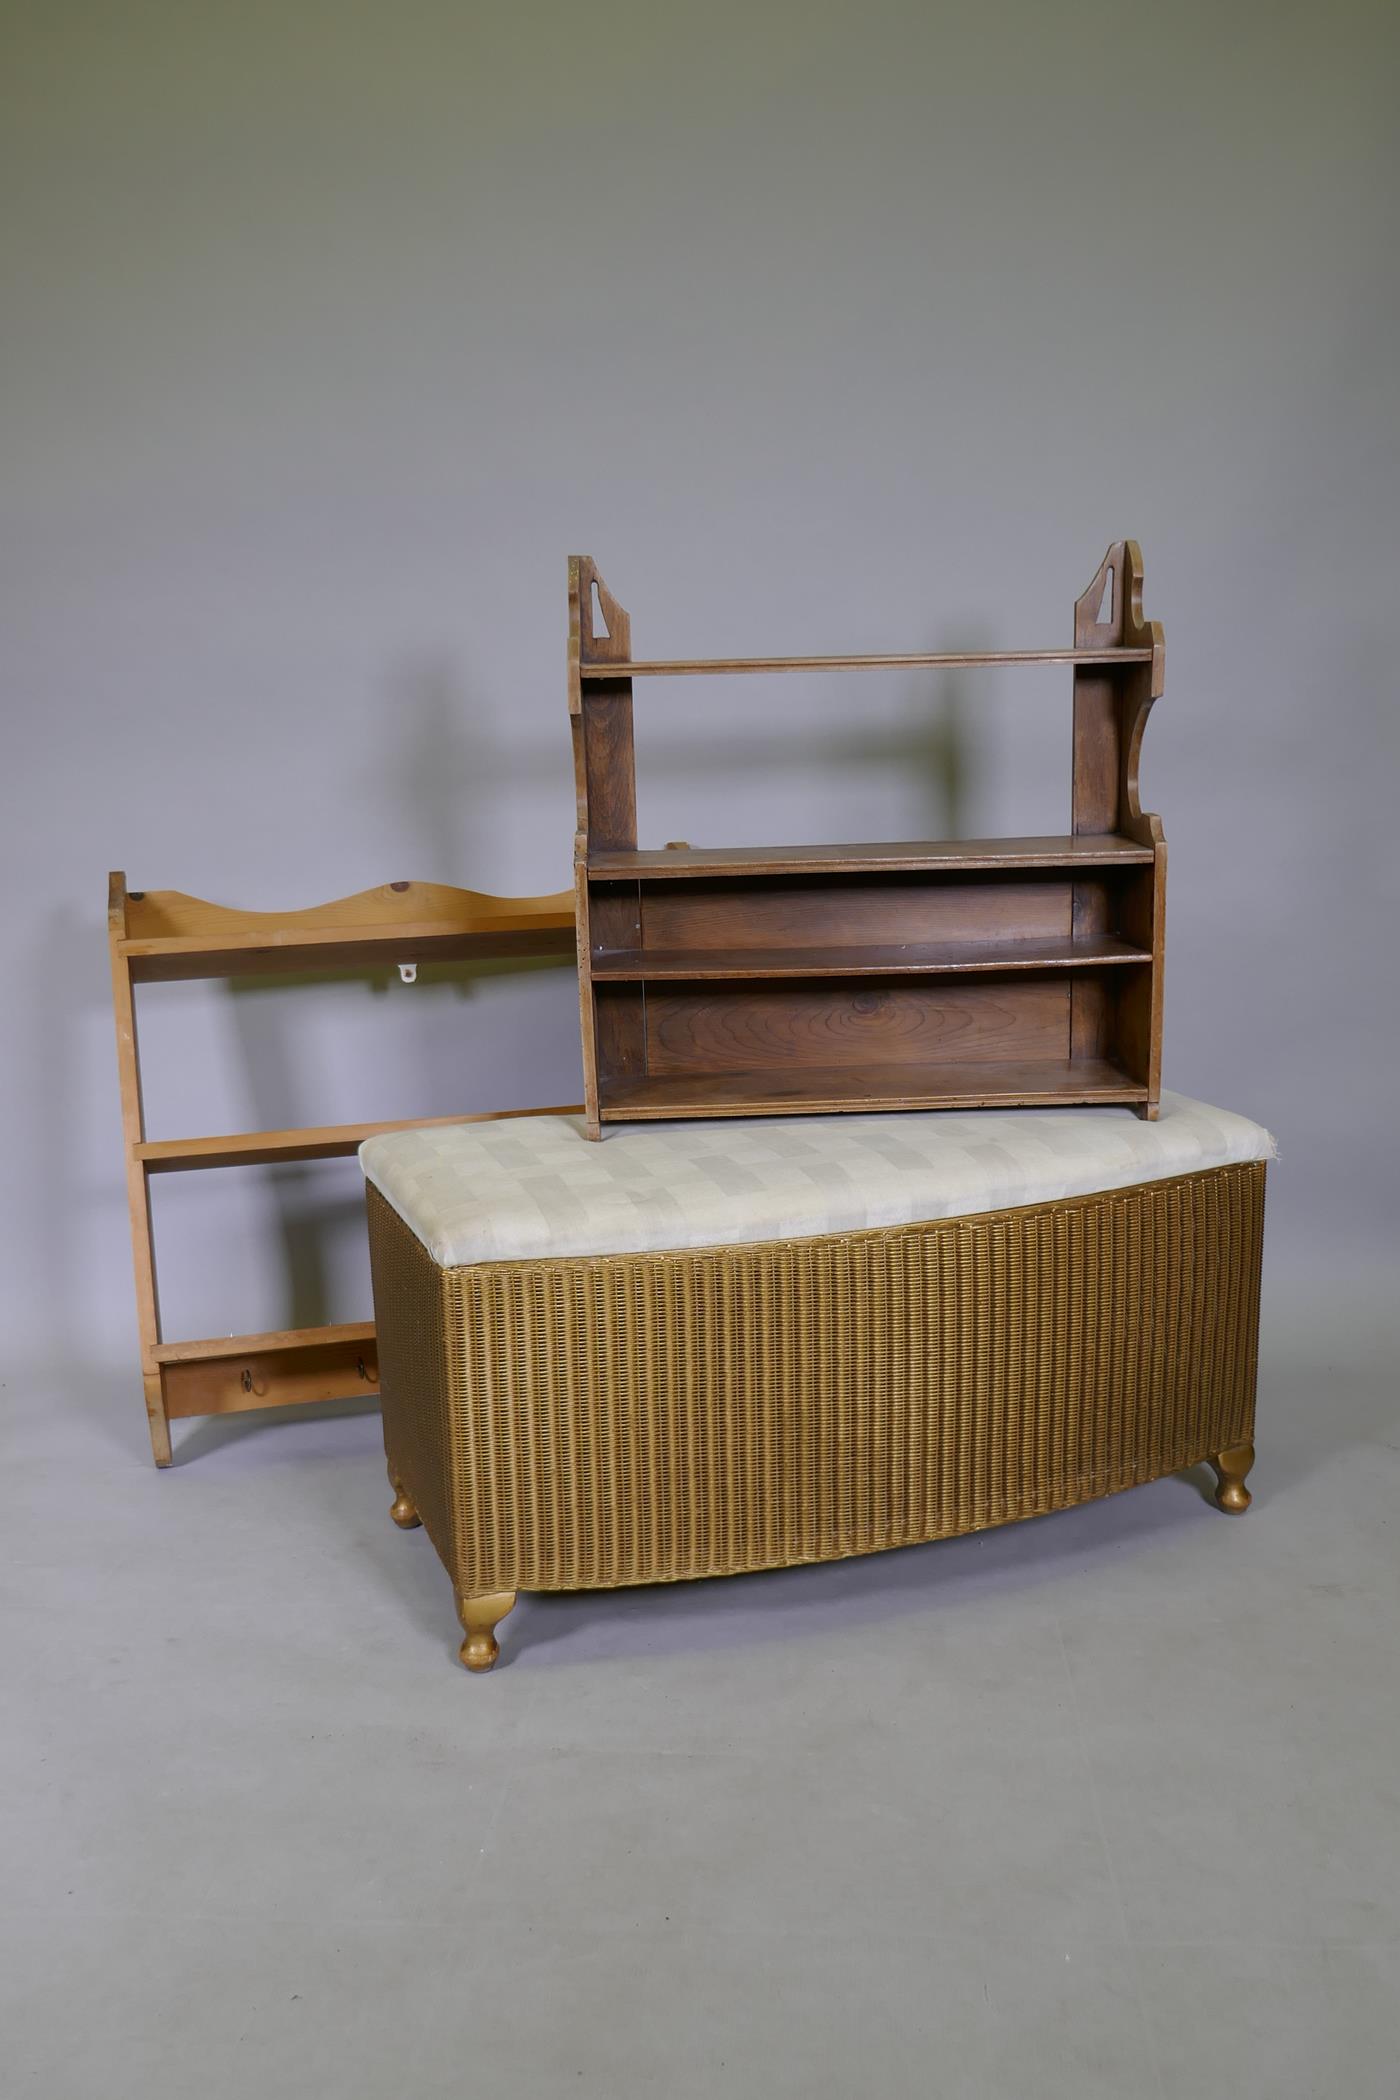 A Lloyd Loom Ottoman with upholstered seat, 90cm wide, and two pine shelf units